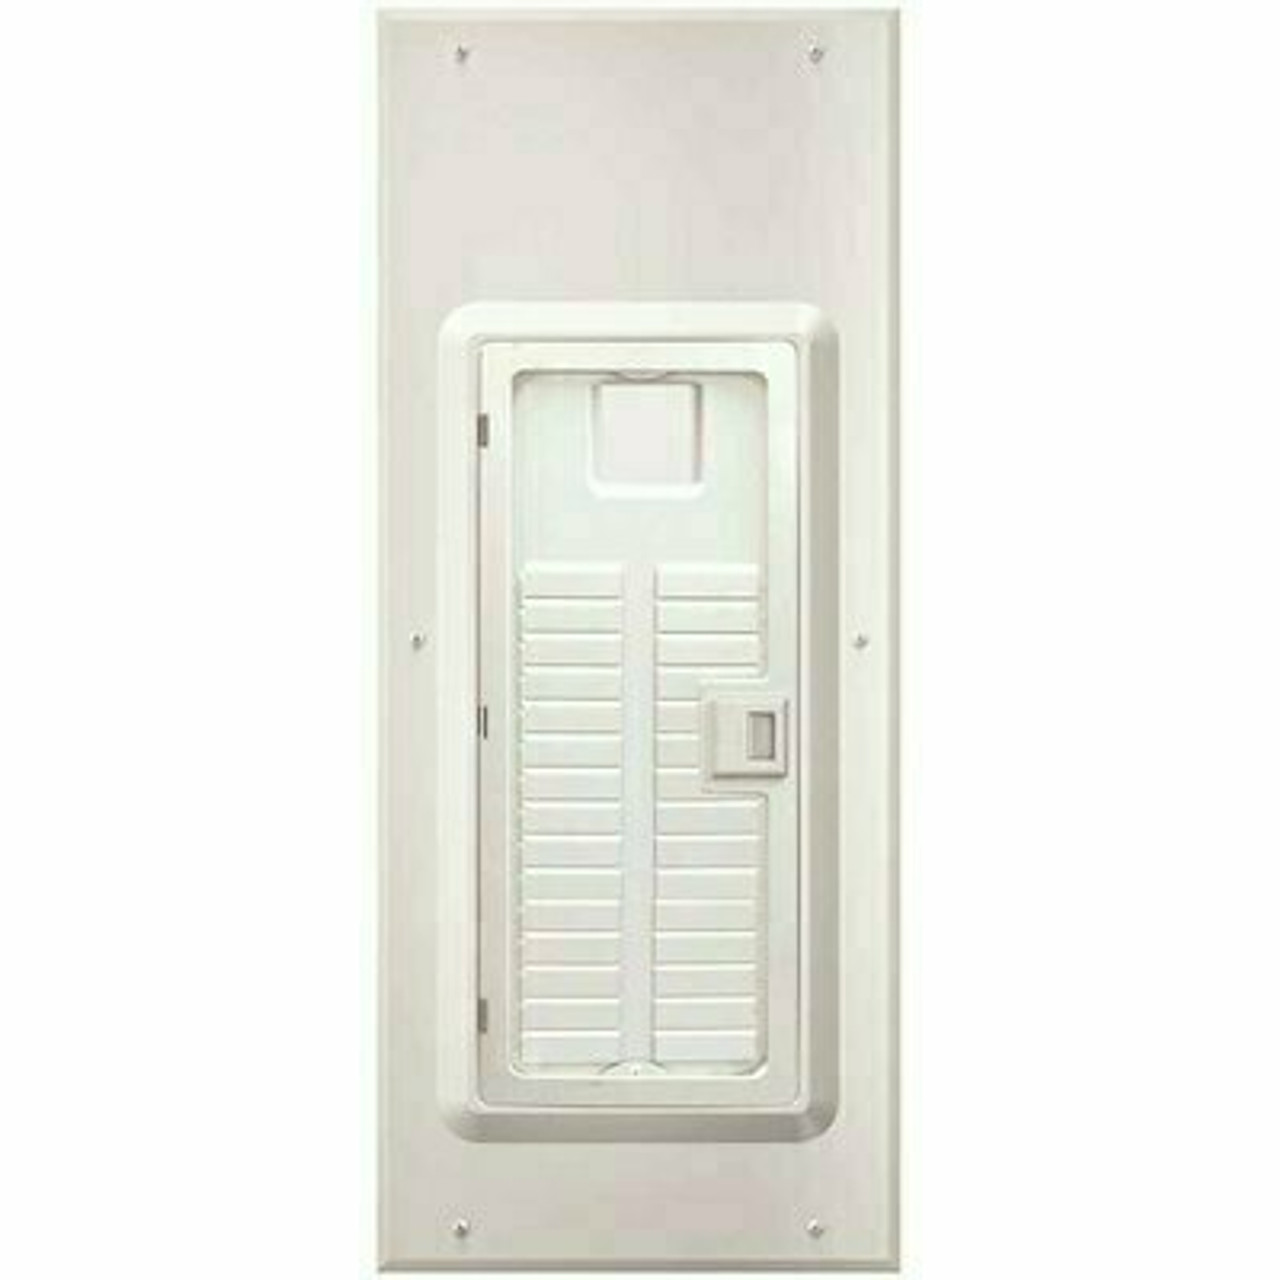 Leviton Nema 1 30-Space Indoor Load Center Cover And Door With Observation Window Flush/Surface Mount